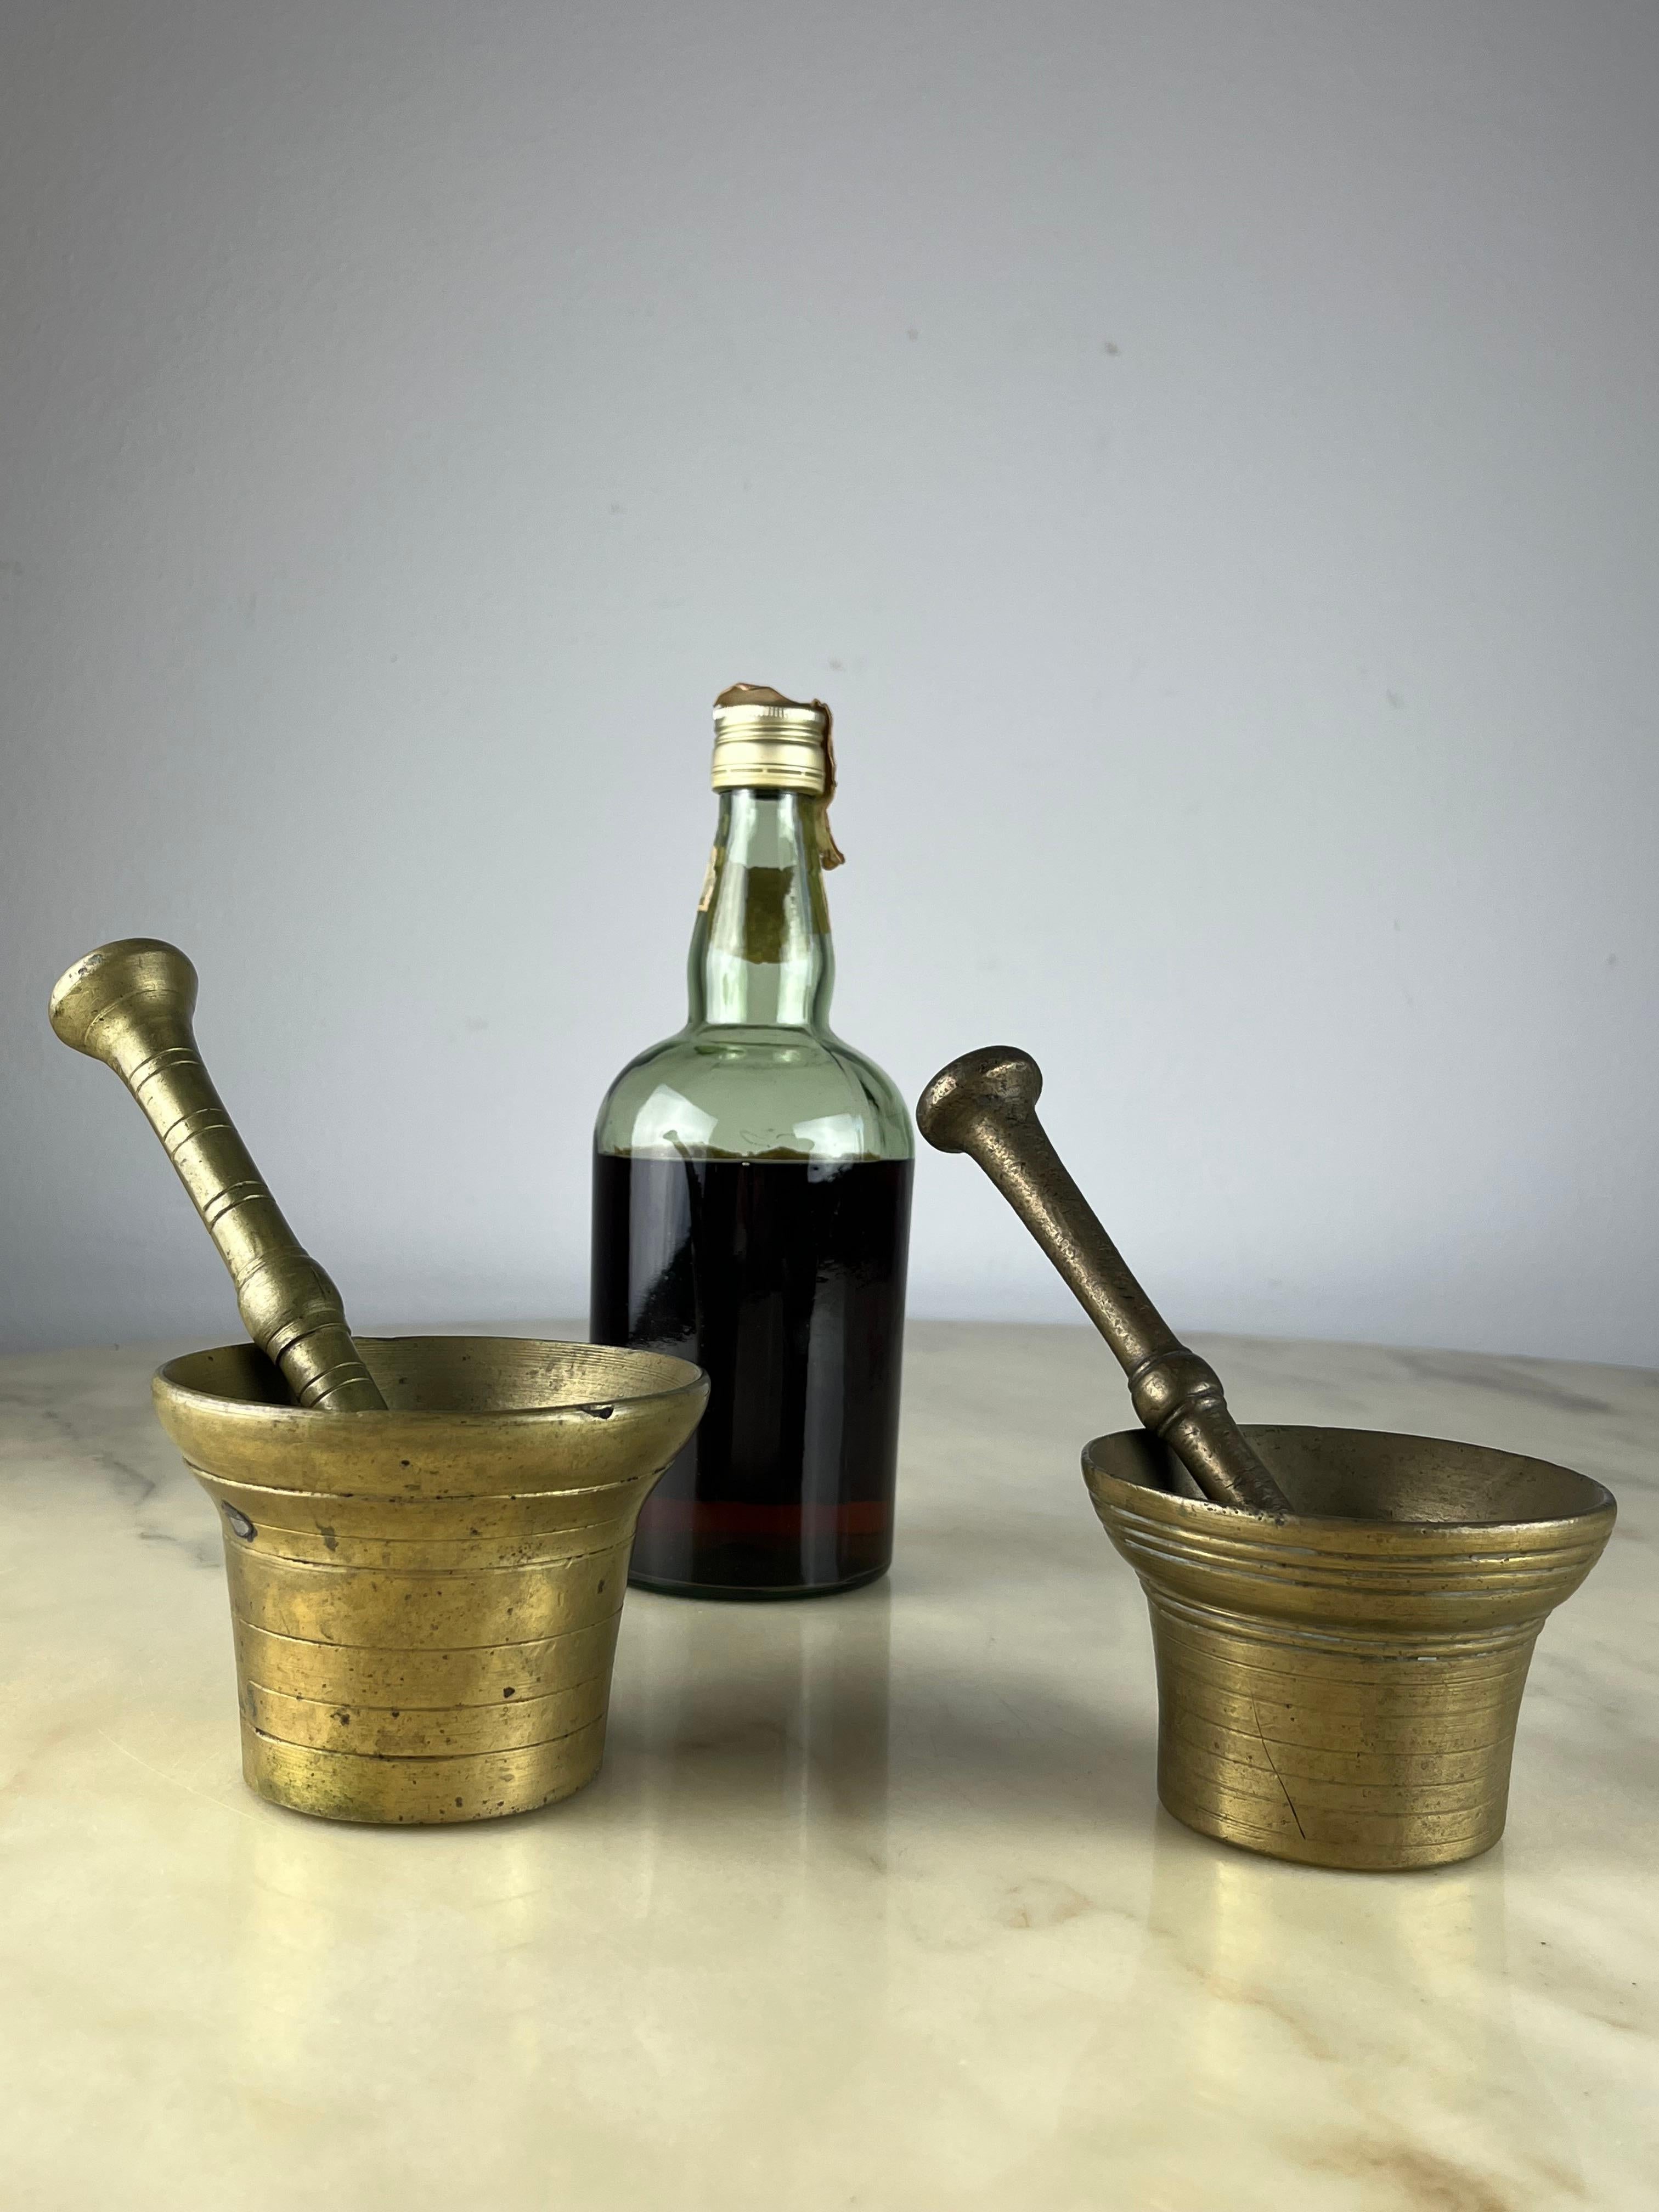 Two Mortars with Pestles, Brass, Genoese 